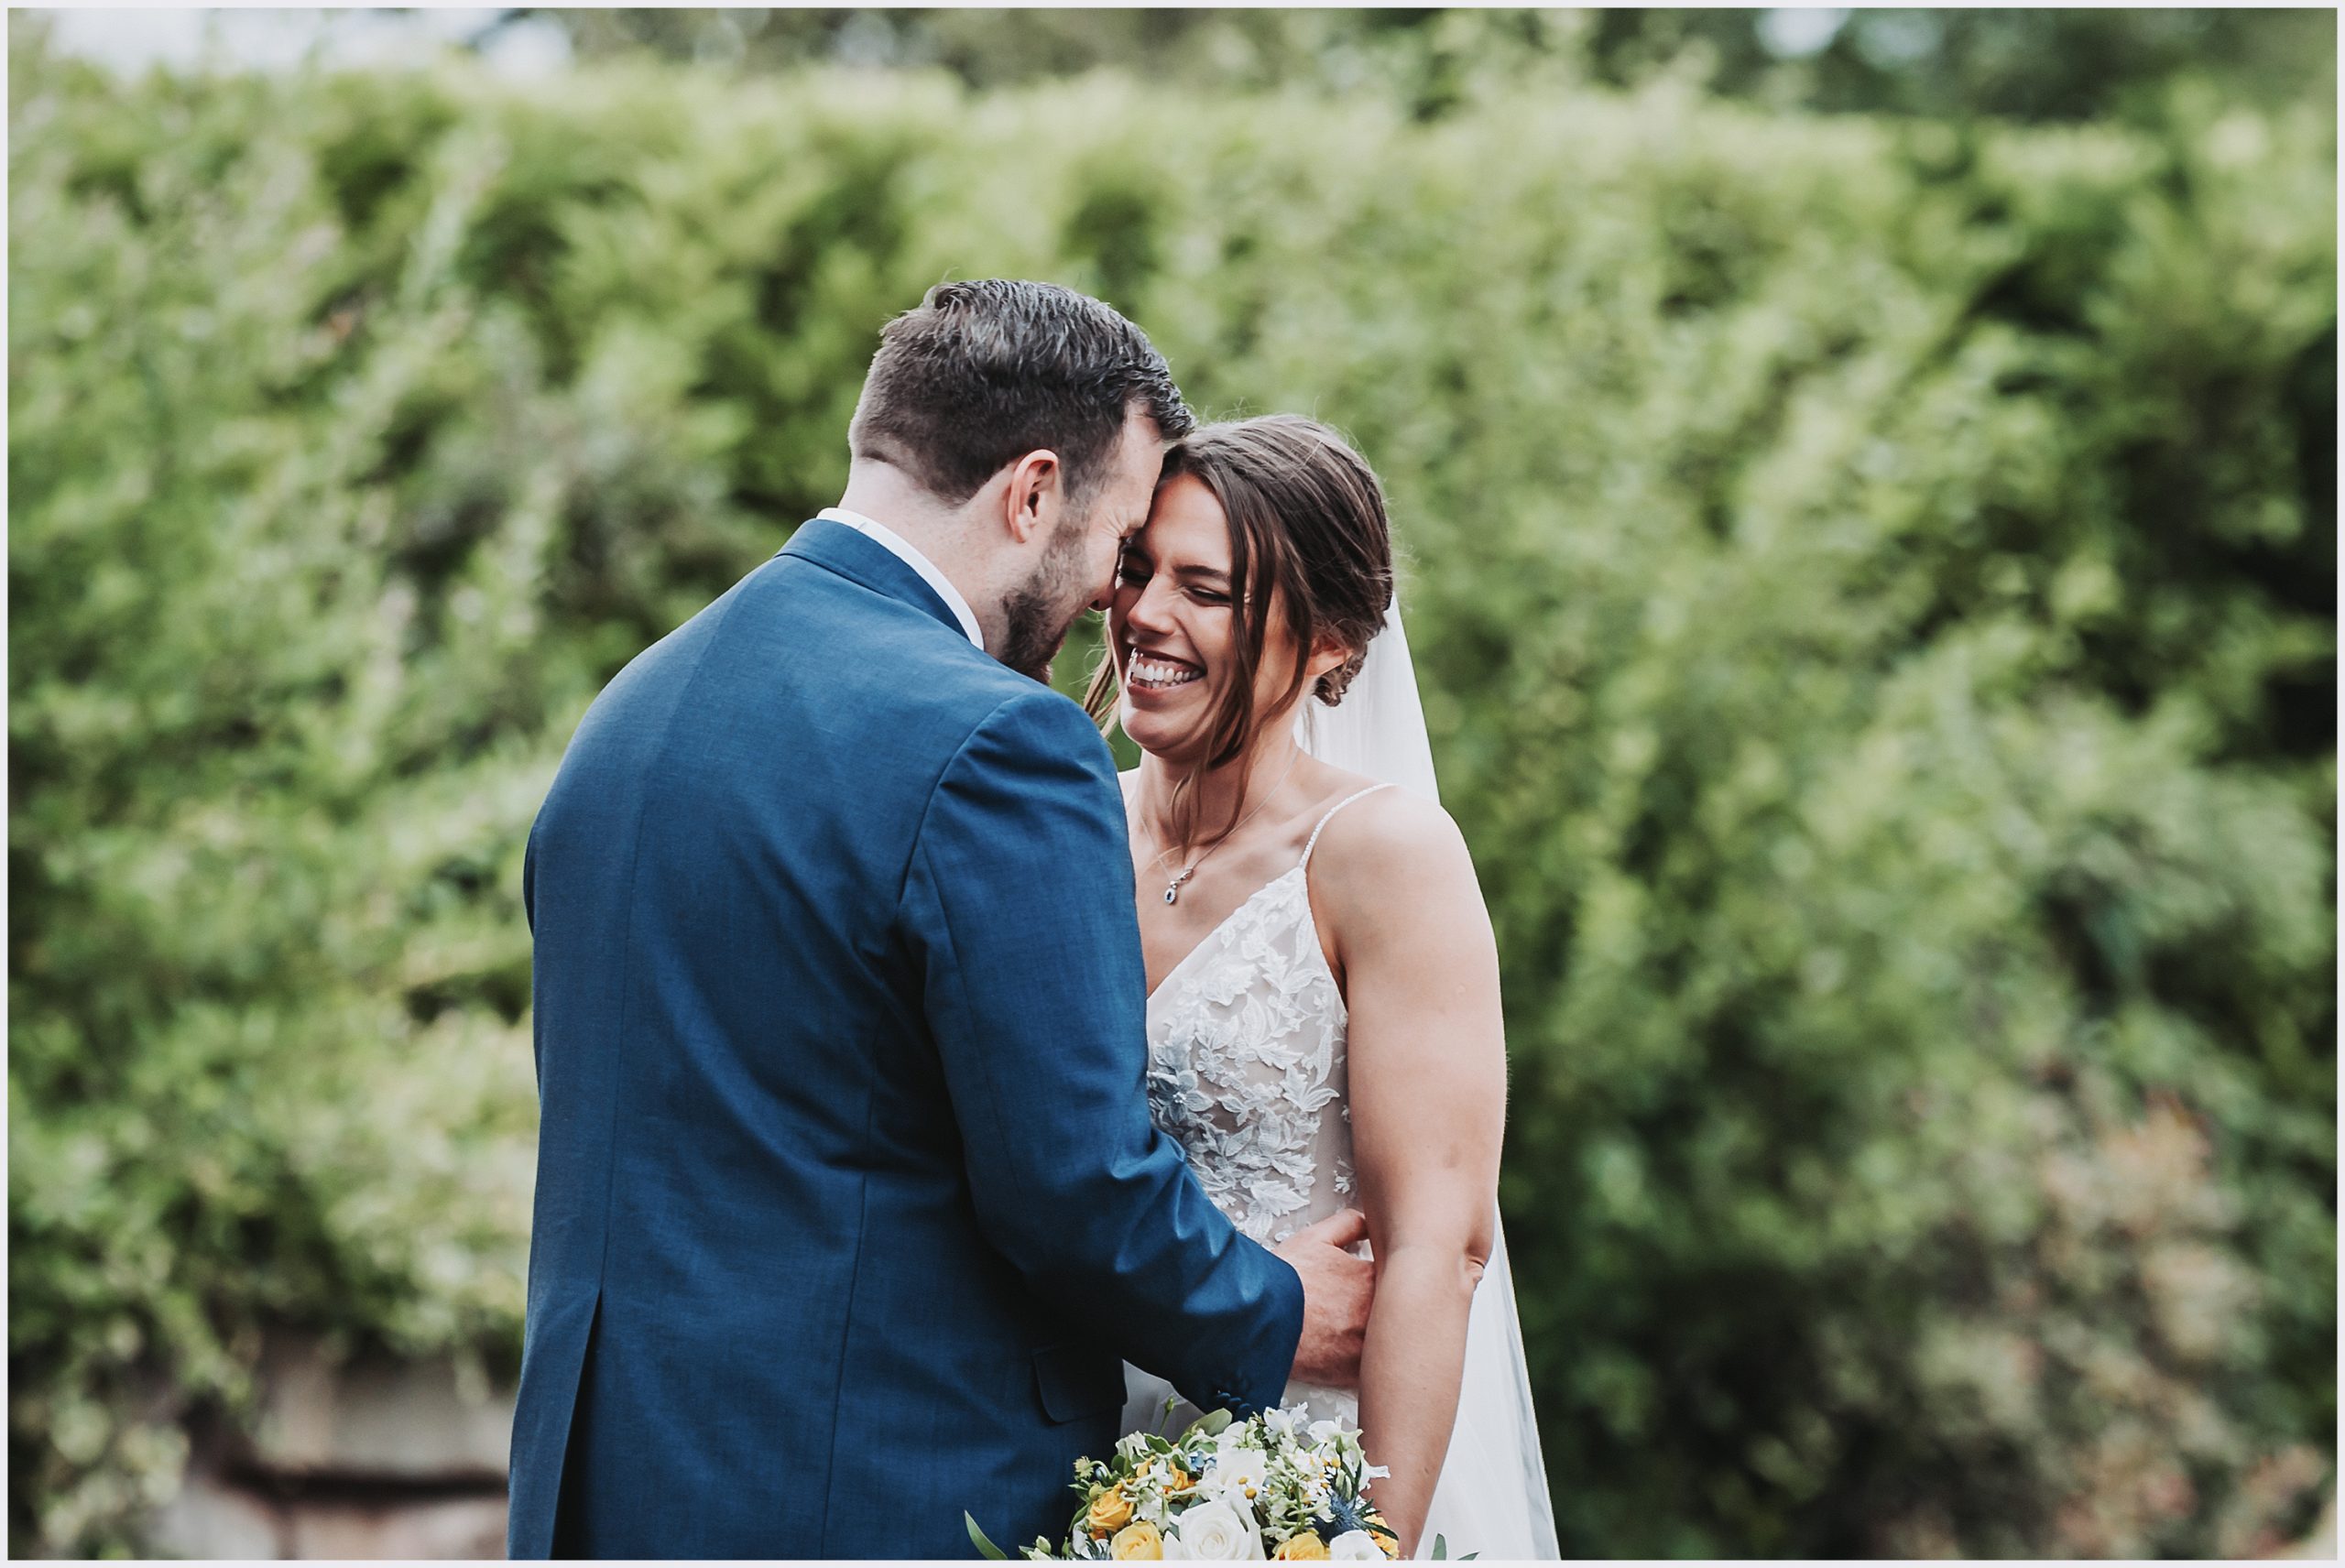 A gorgeous bride smiles at her husband during their bride and groom photoshoot at The Grosvenor Pulford Hotel and Spa.  Image captured by Chester wedding photographer Helena Jayne Photography a Chester based wedding photographer